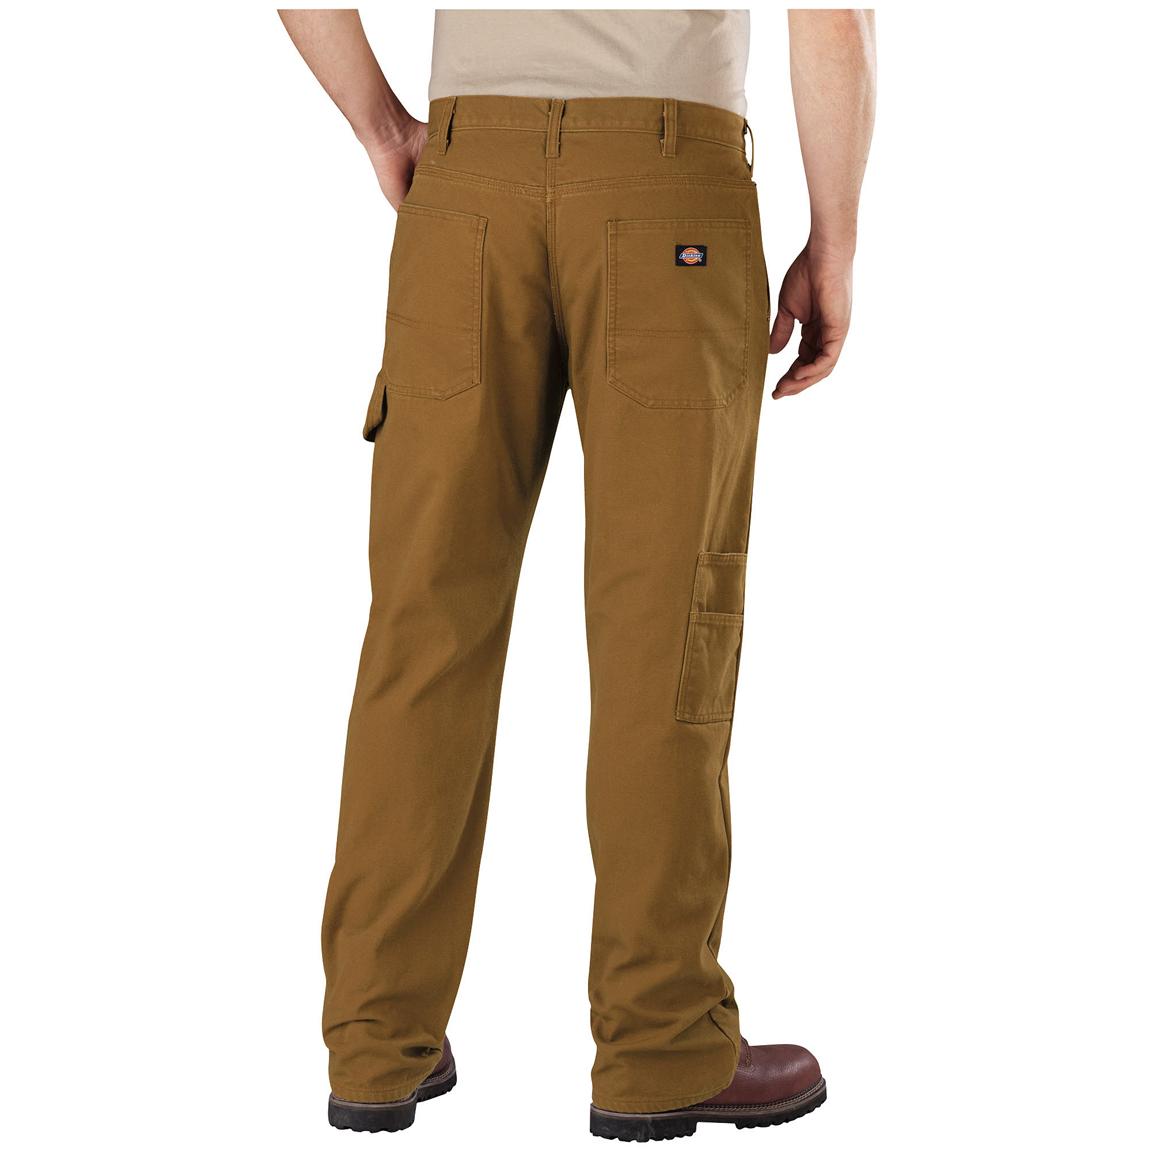 Men's Dickies Relaxed Straight Fit Flannel-lined Carpenter Jeans